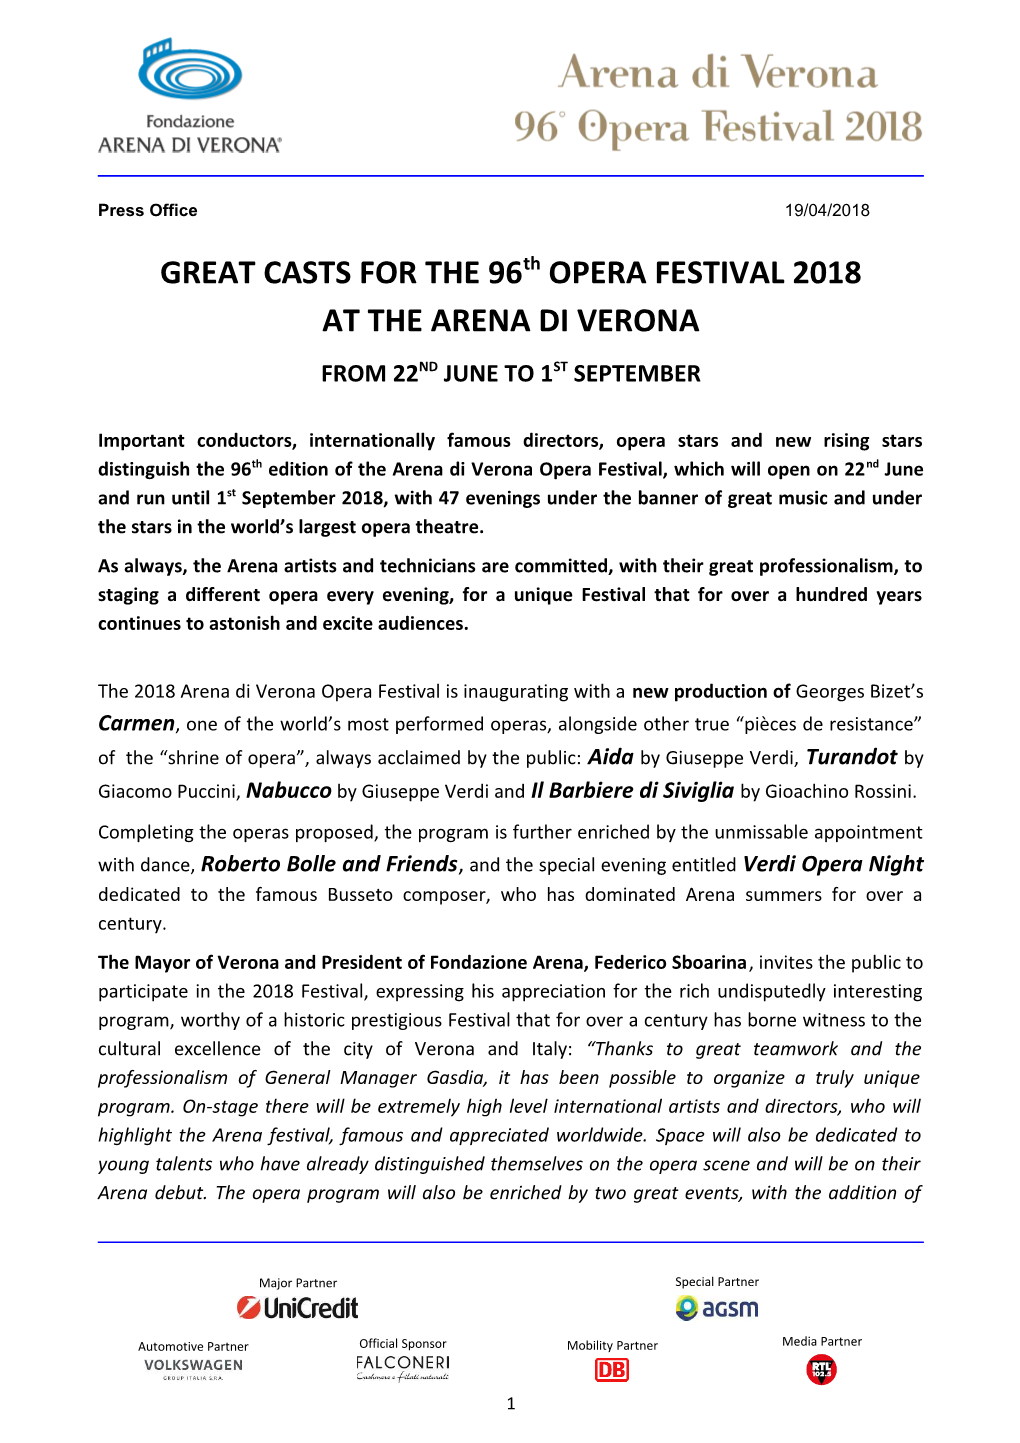 GREAT CASTS for the 96Th OPERA FESTIVAL 2018